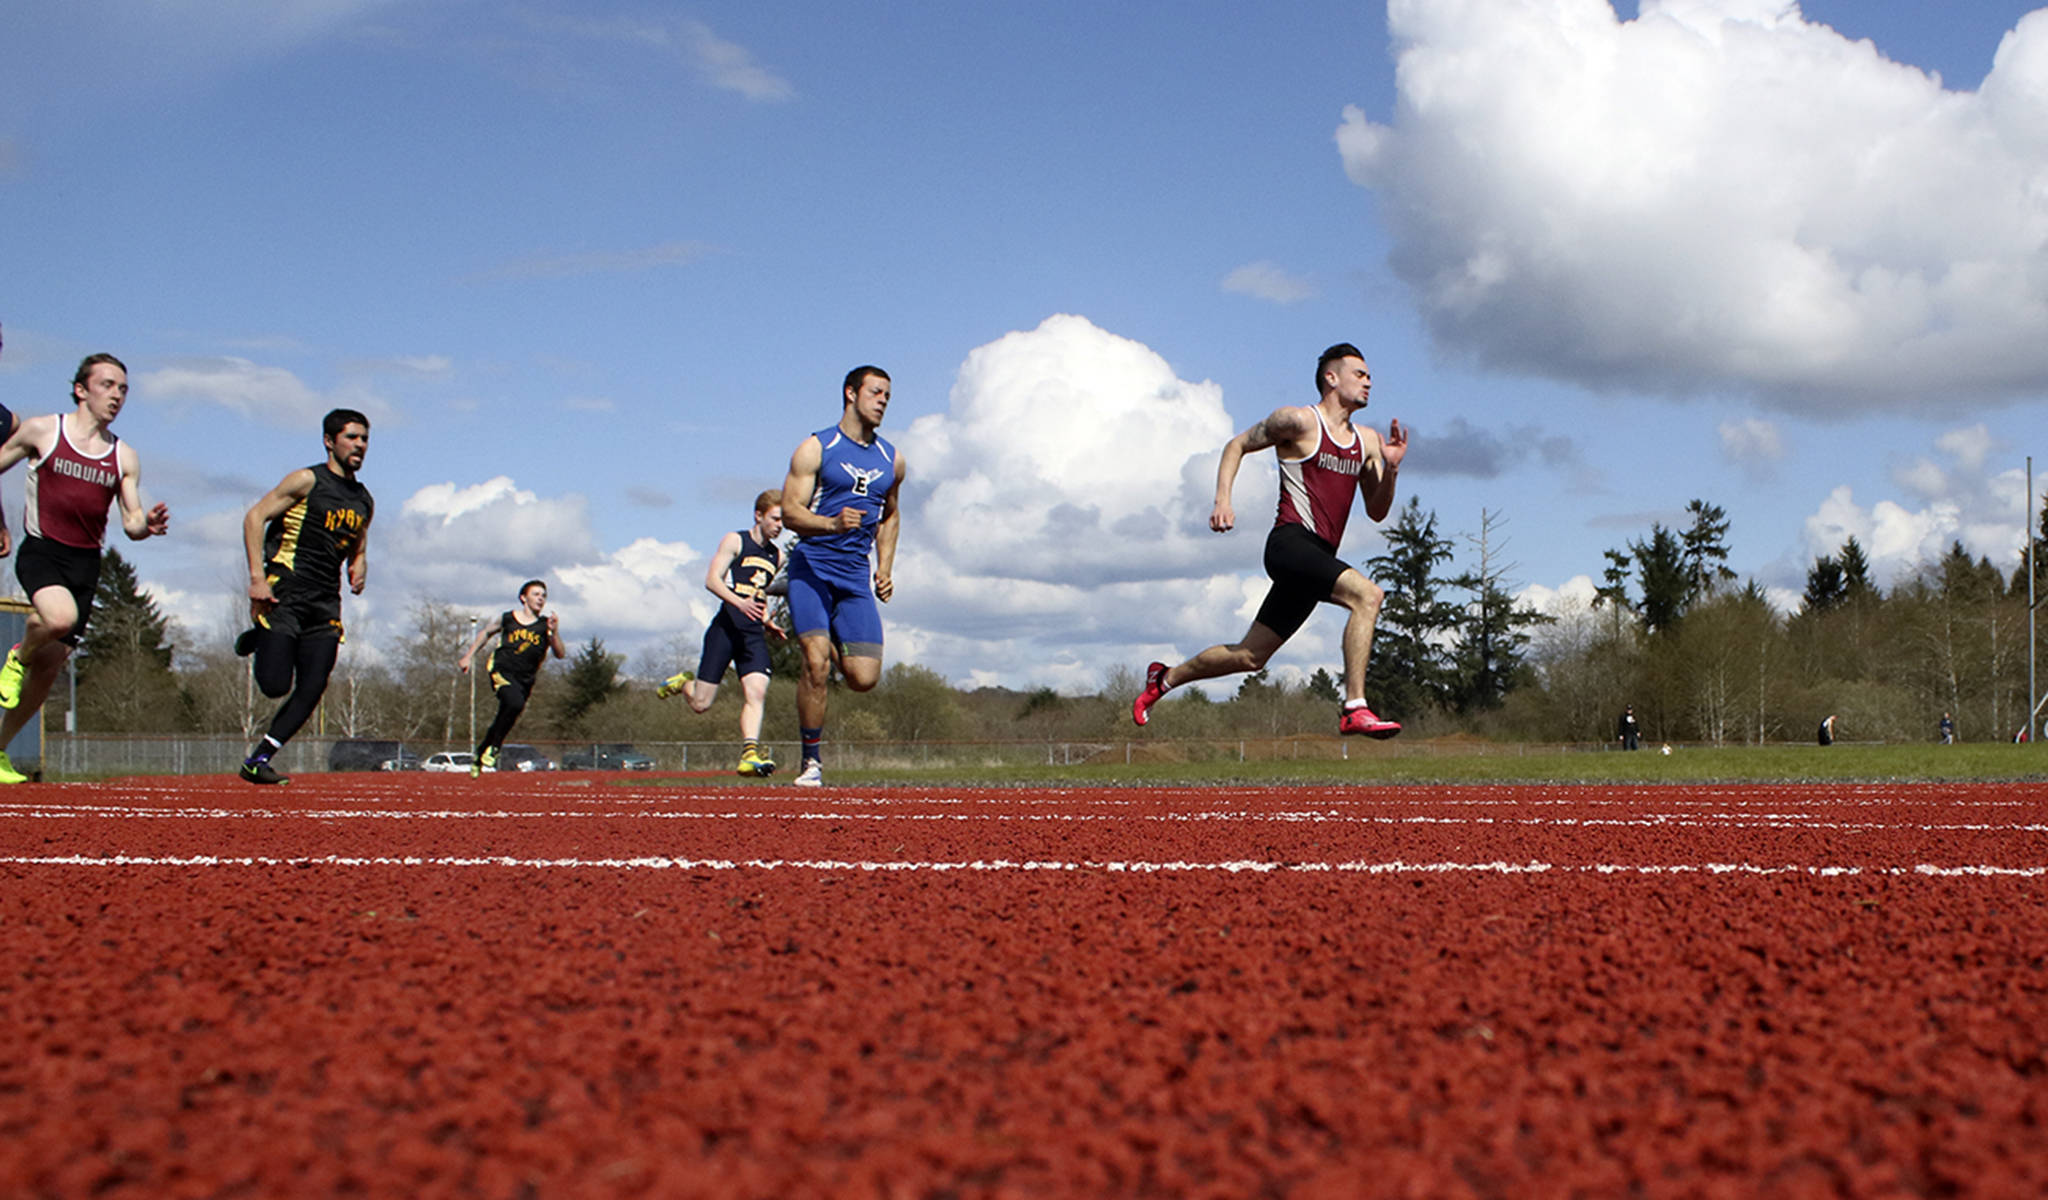 (Brendan Carl | The Daily World) Hoquiam’s Anthony Nash leads the field in the 200 during the Ray Ryan Memorial Grays Harbor All-County Track & Field Championships on Saturday. Nash was selected as the male athlete of the meet.